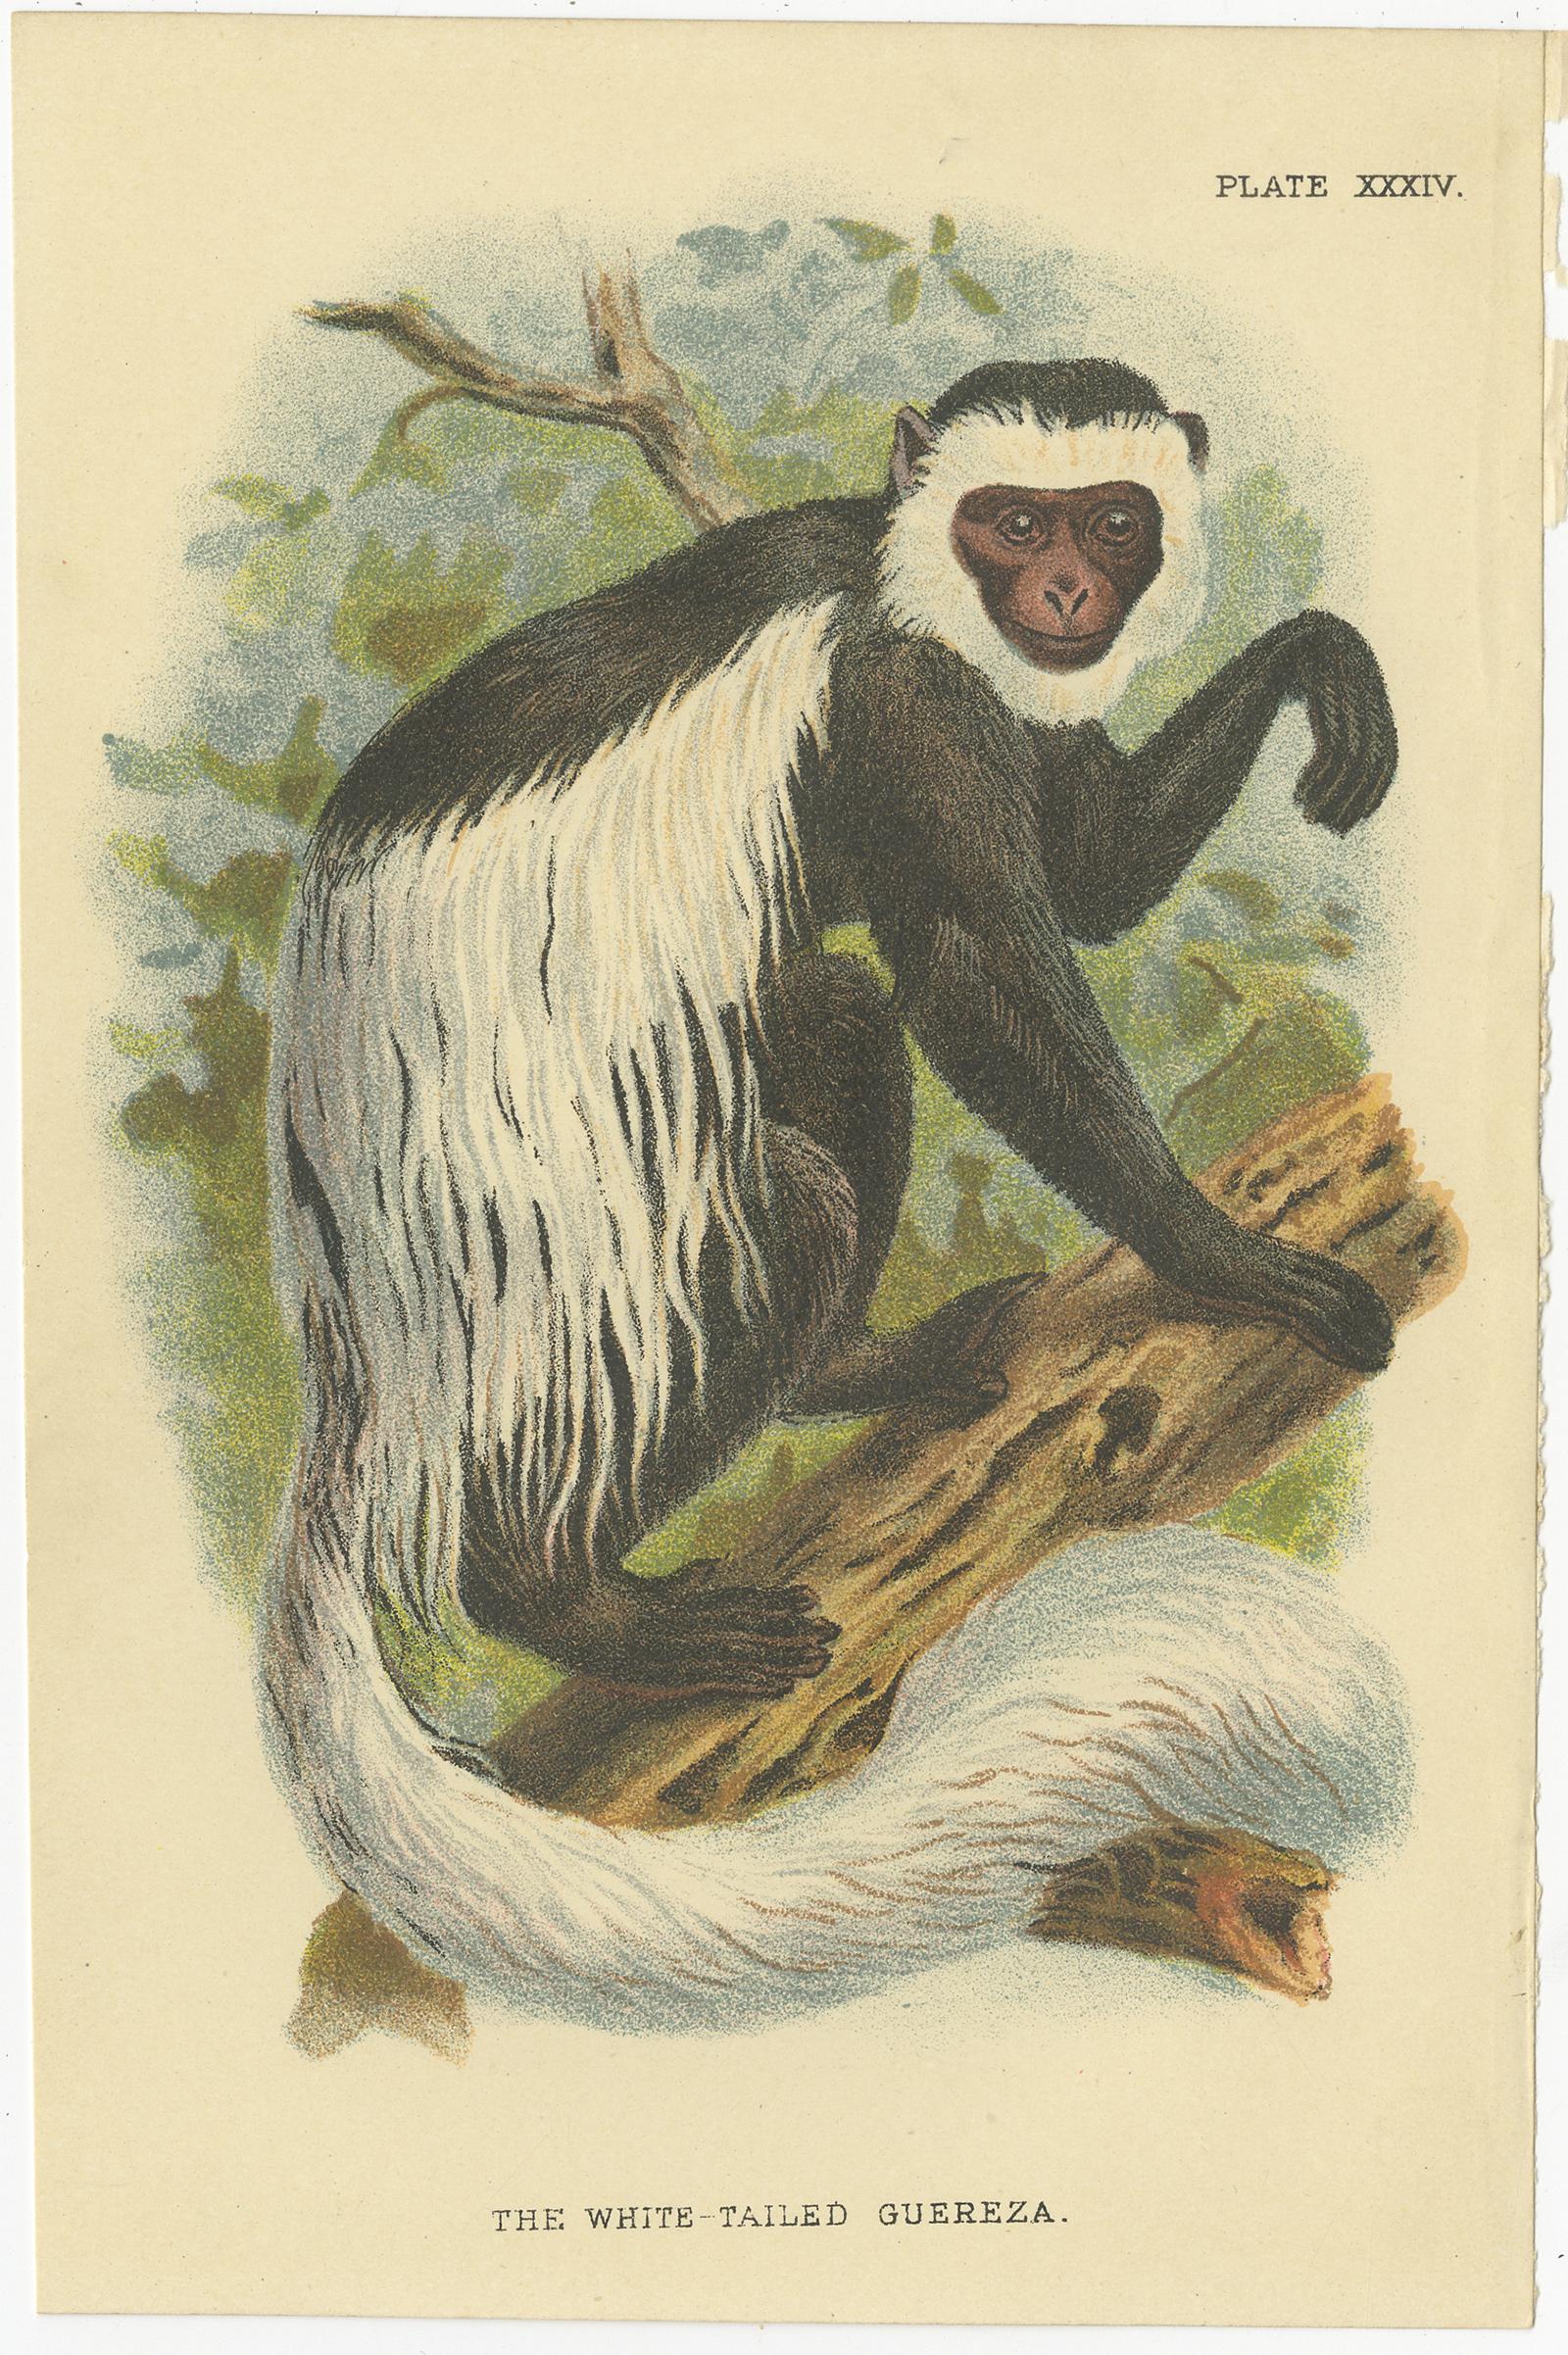 Set of two antique prints titled 'Bay Guereza - The White-Tailed Guereza'. Chromolithograph of guereza monkey species. These prints originate from 'Lloyds's Natural History (..)', by Edward Lloyd, published 1894-1897.